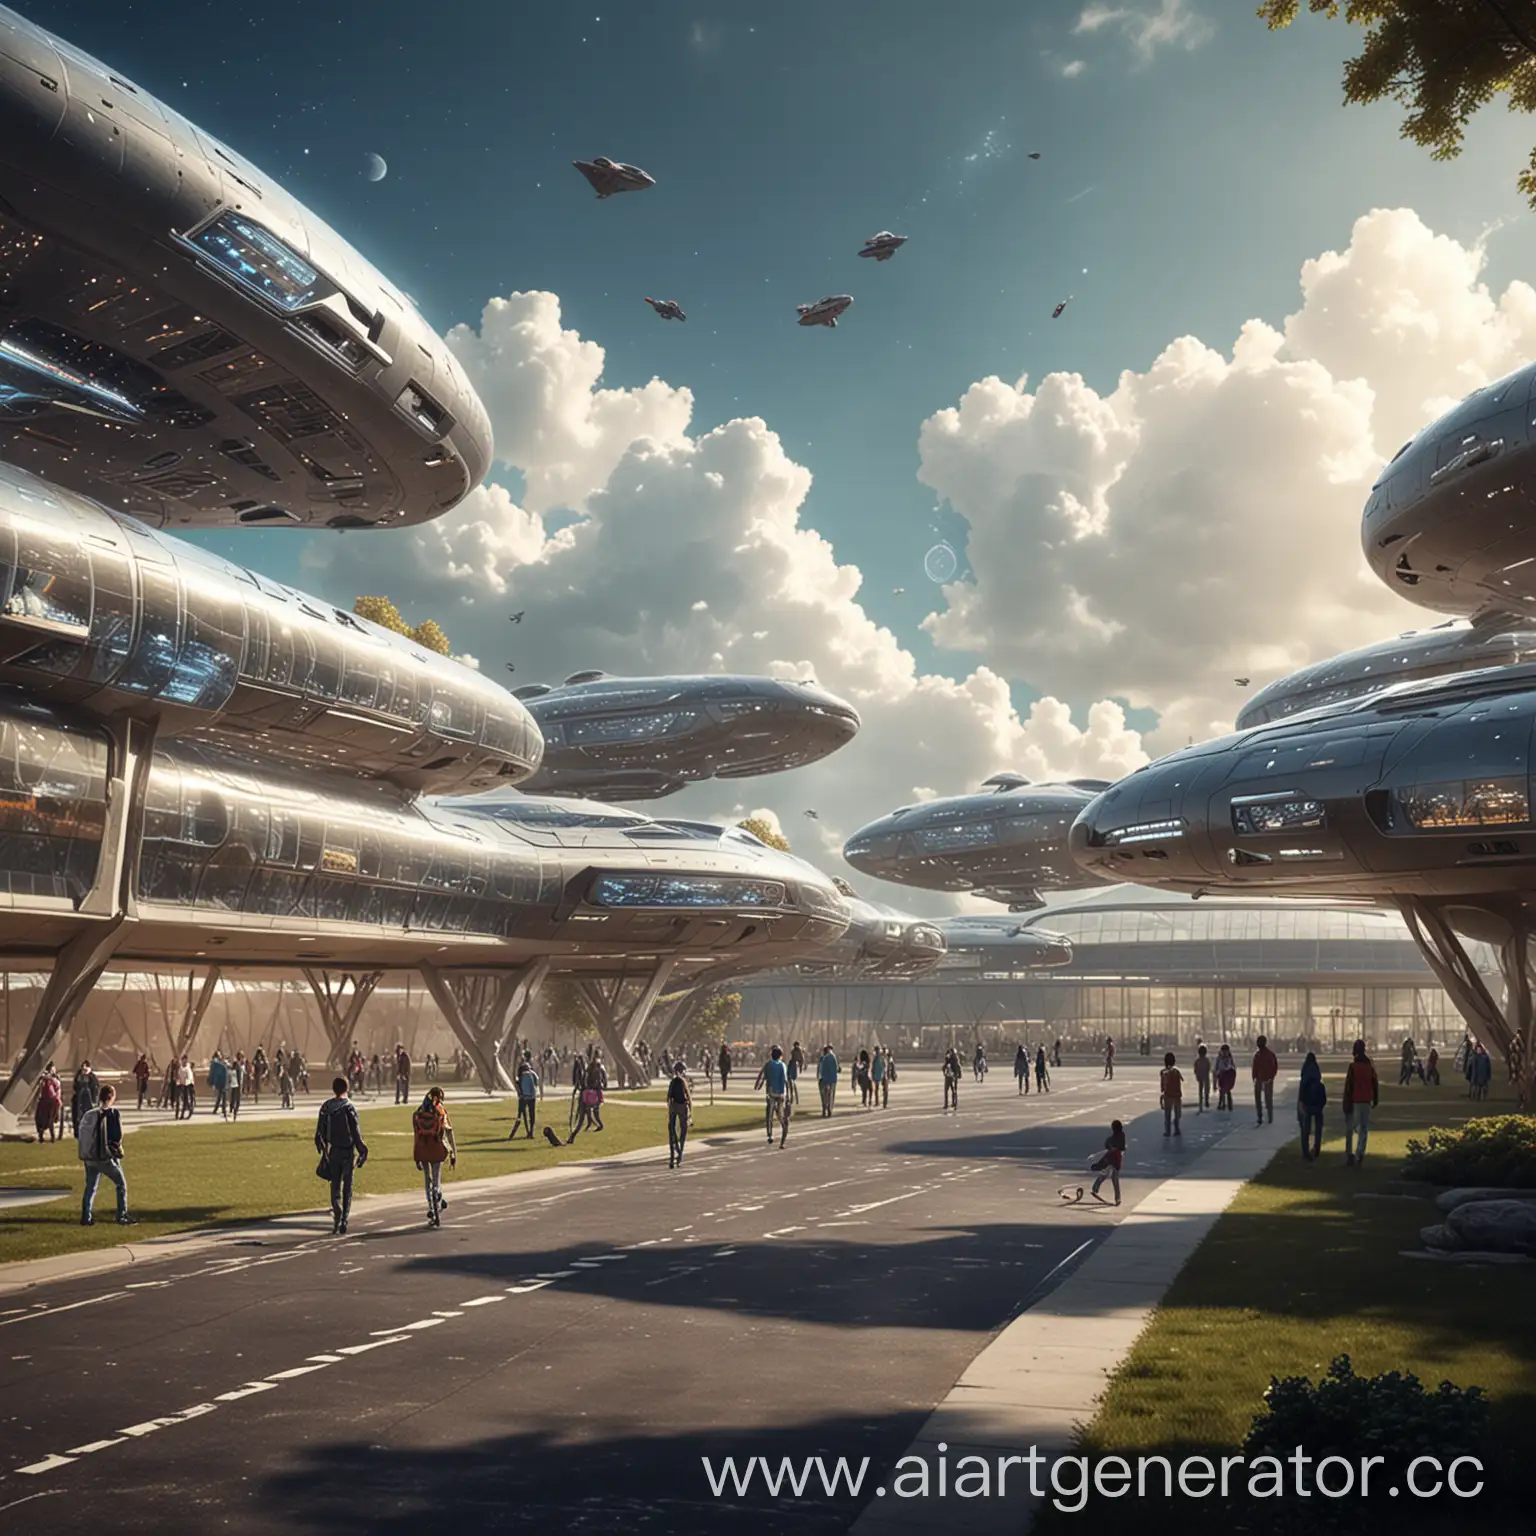 Futuristic-School-Building-with-Flying-Spaceships